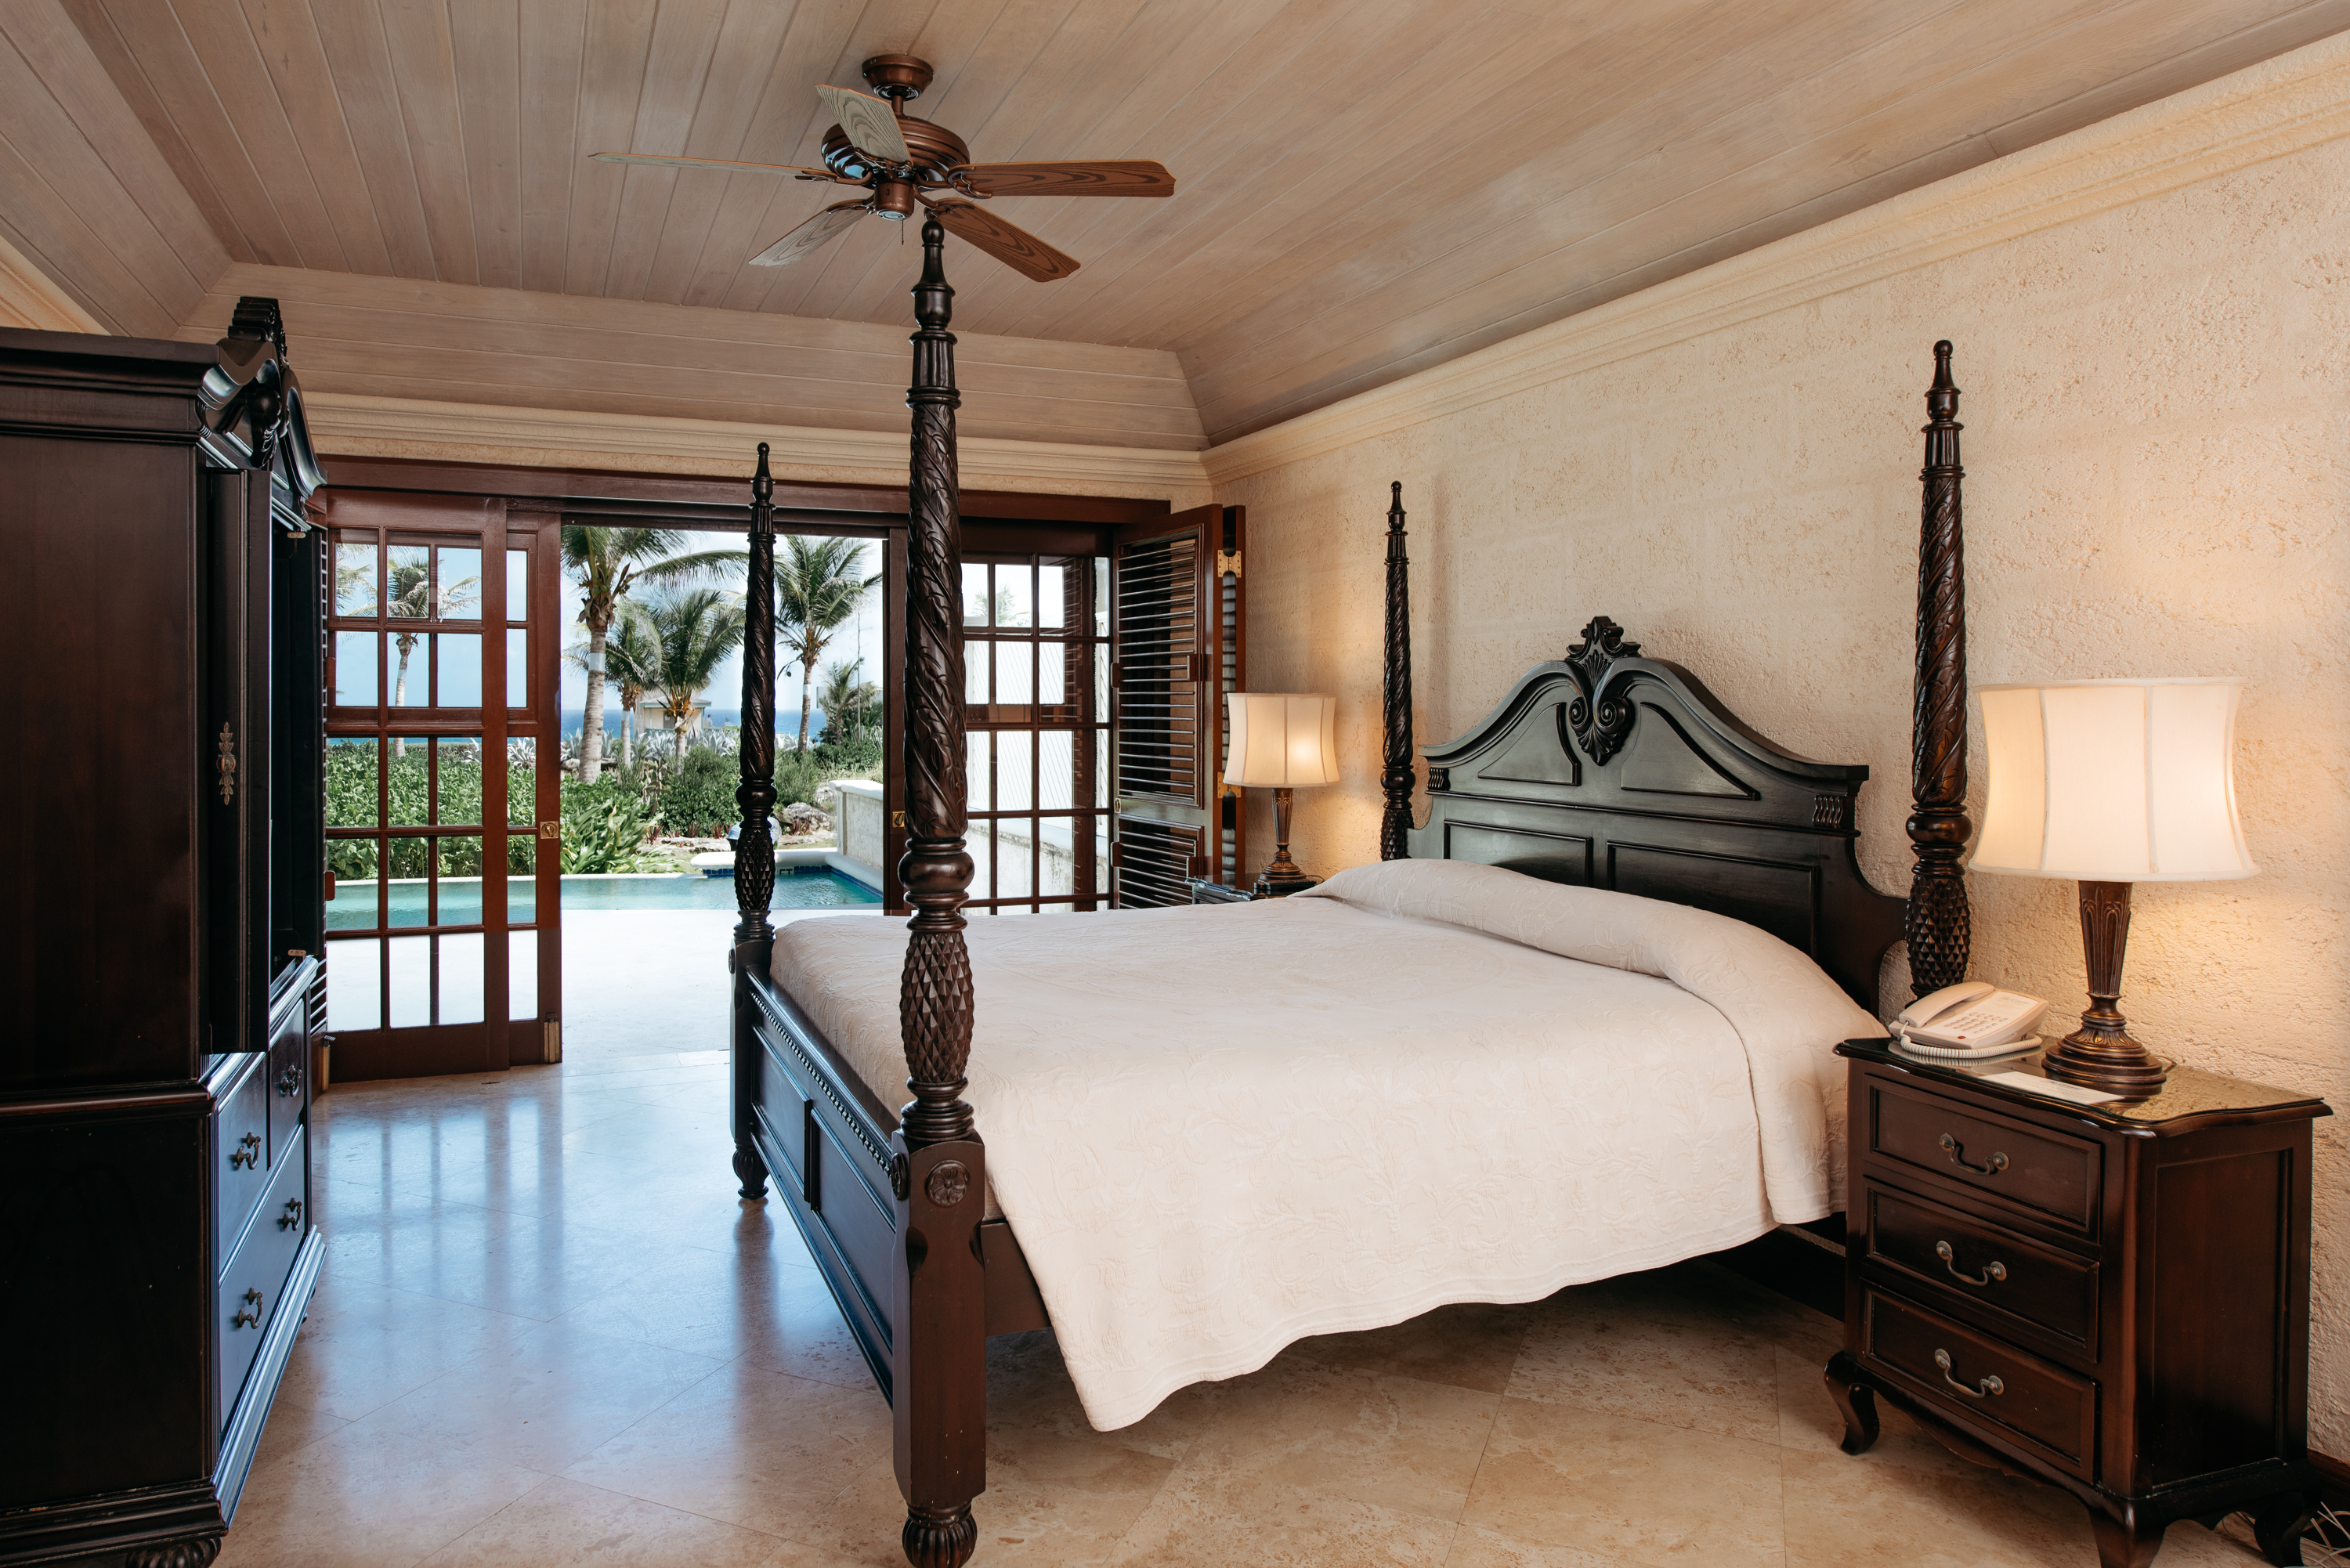 The interior of the typical ocean view suite at The Crane.